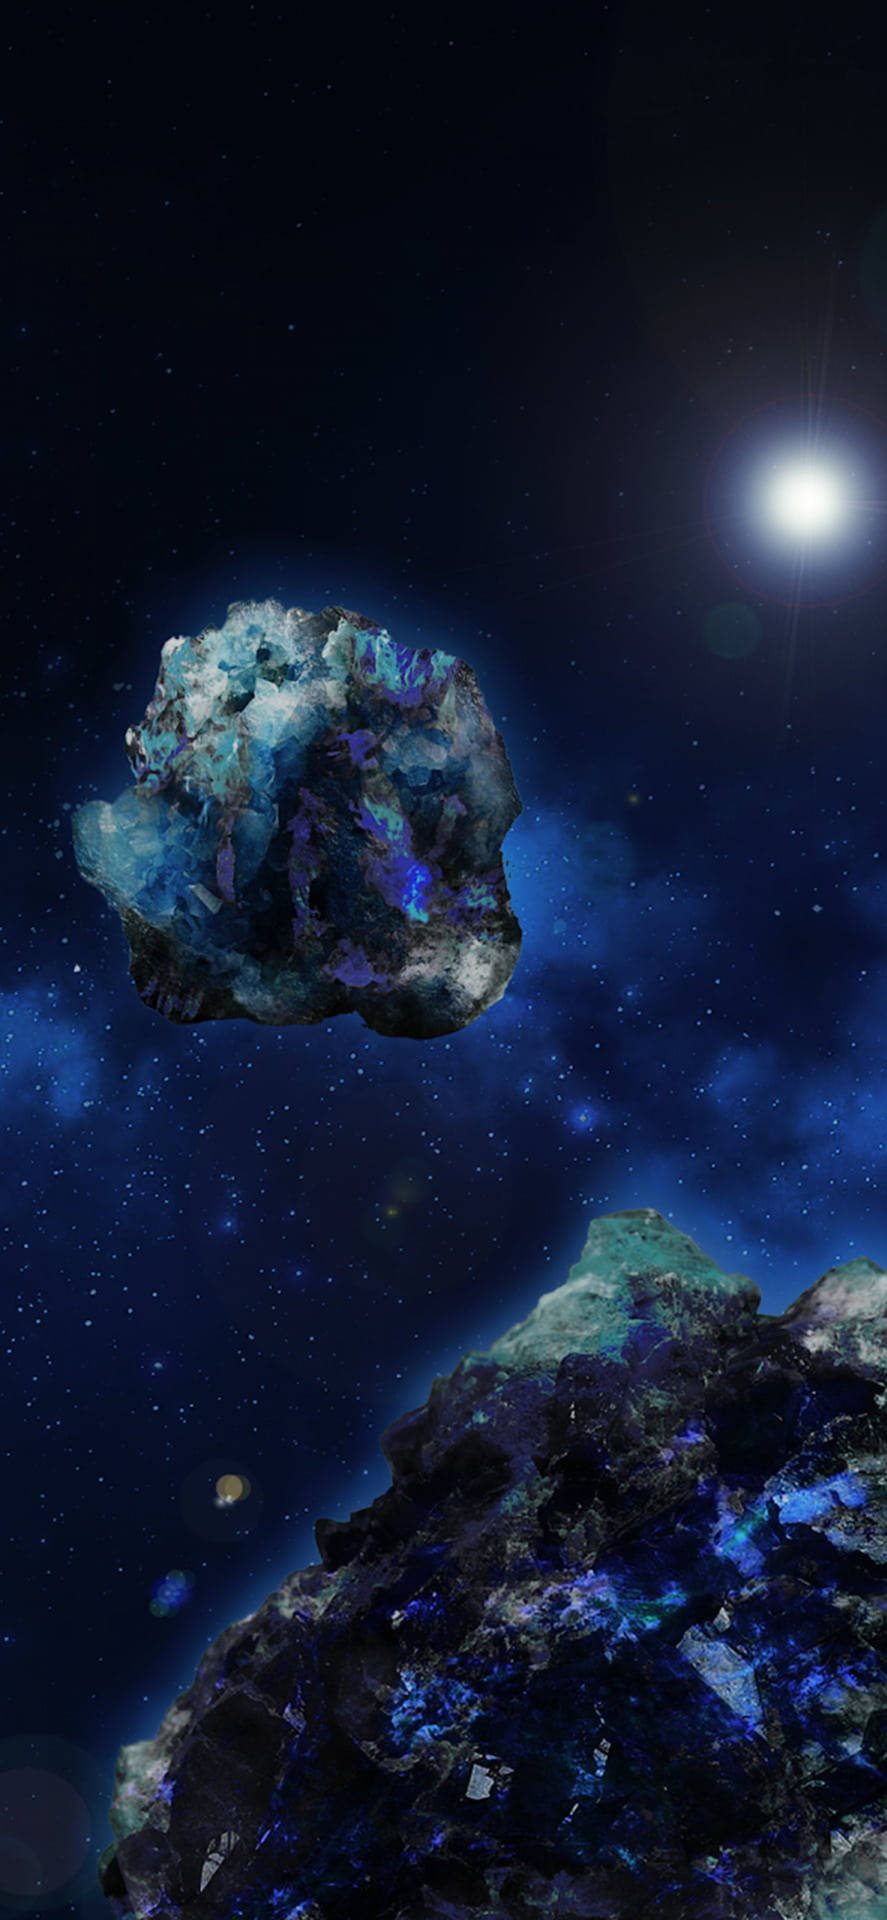 Asteroids In The Cosmos Wallpaper